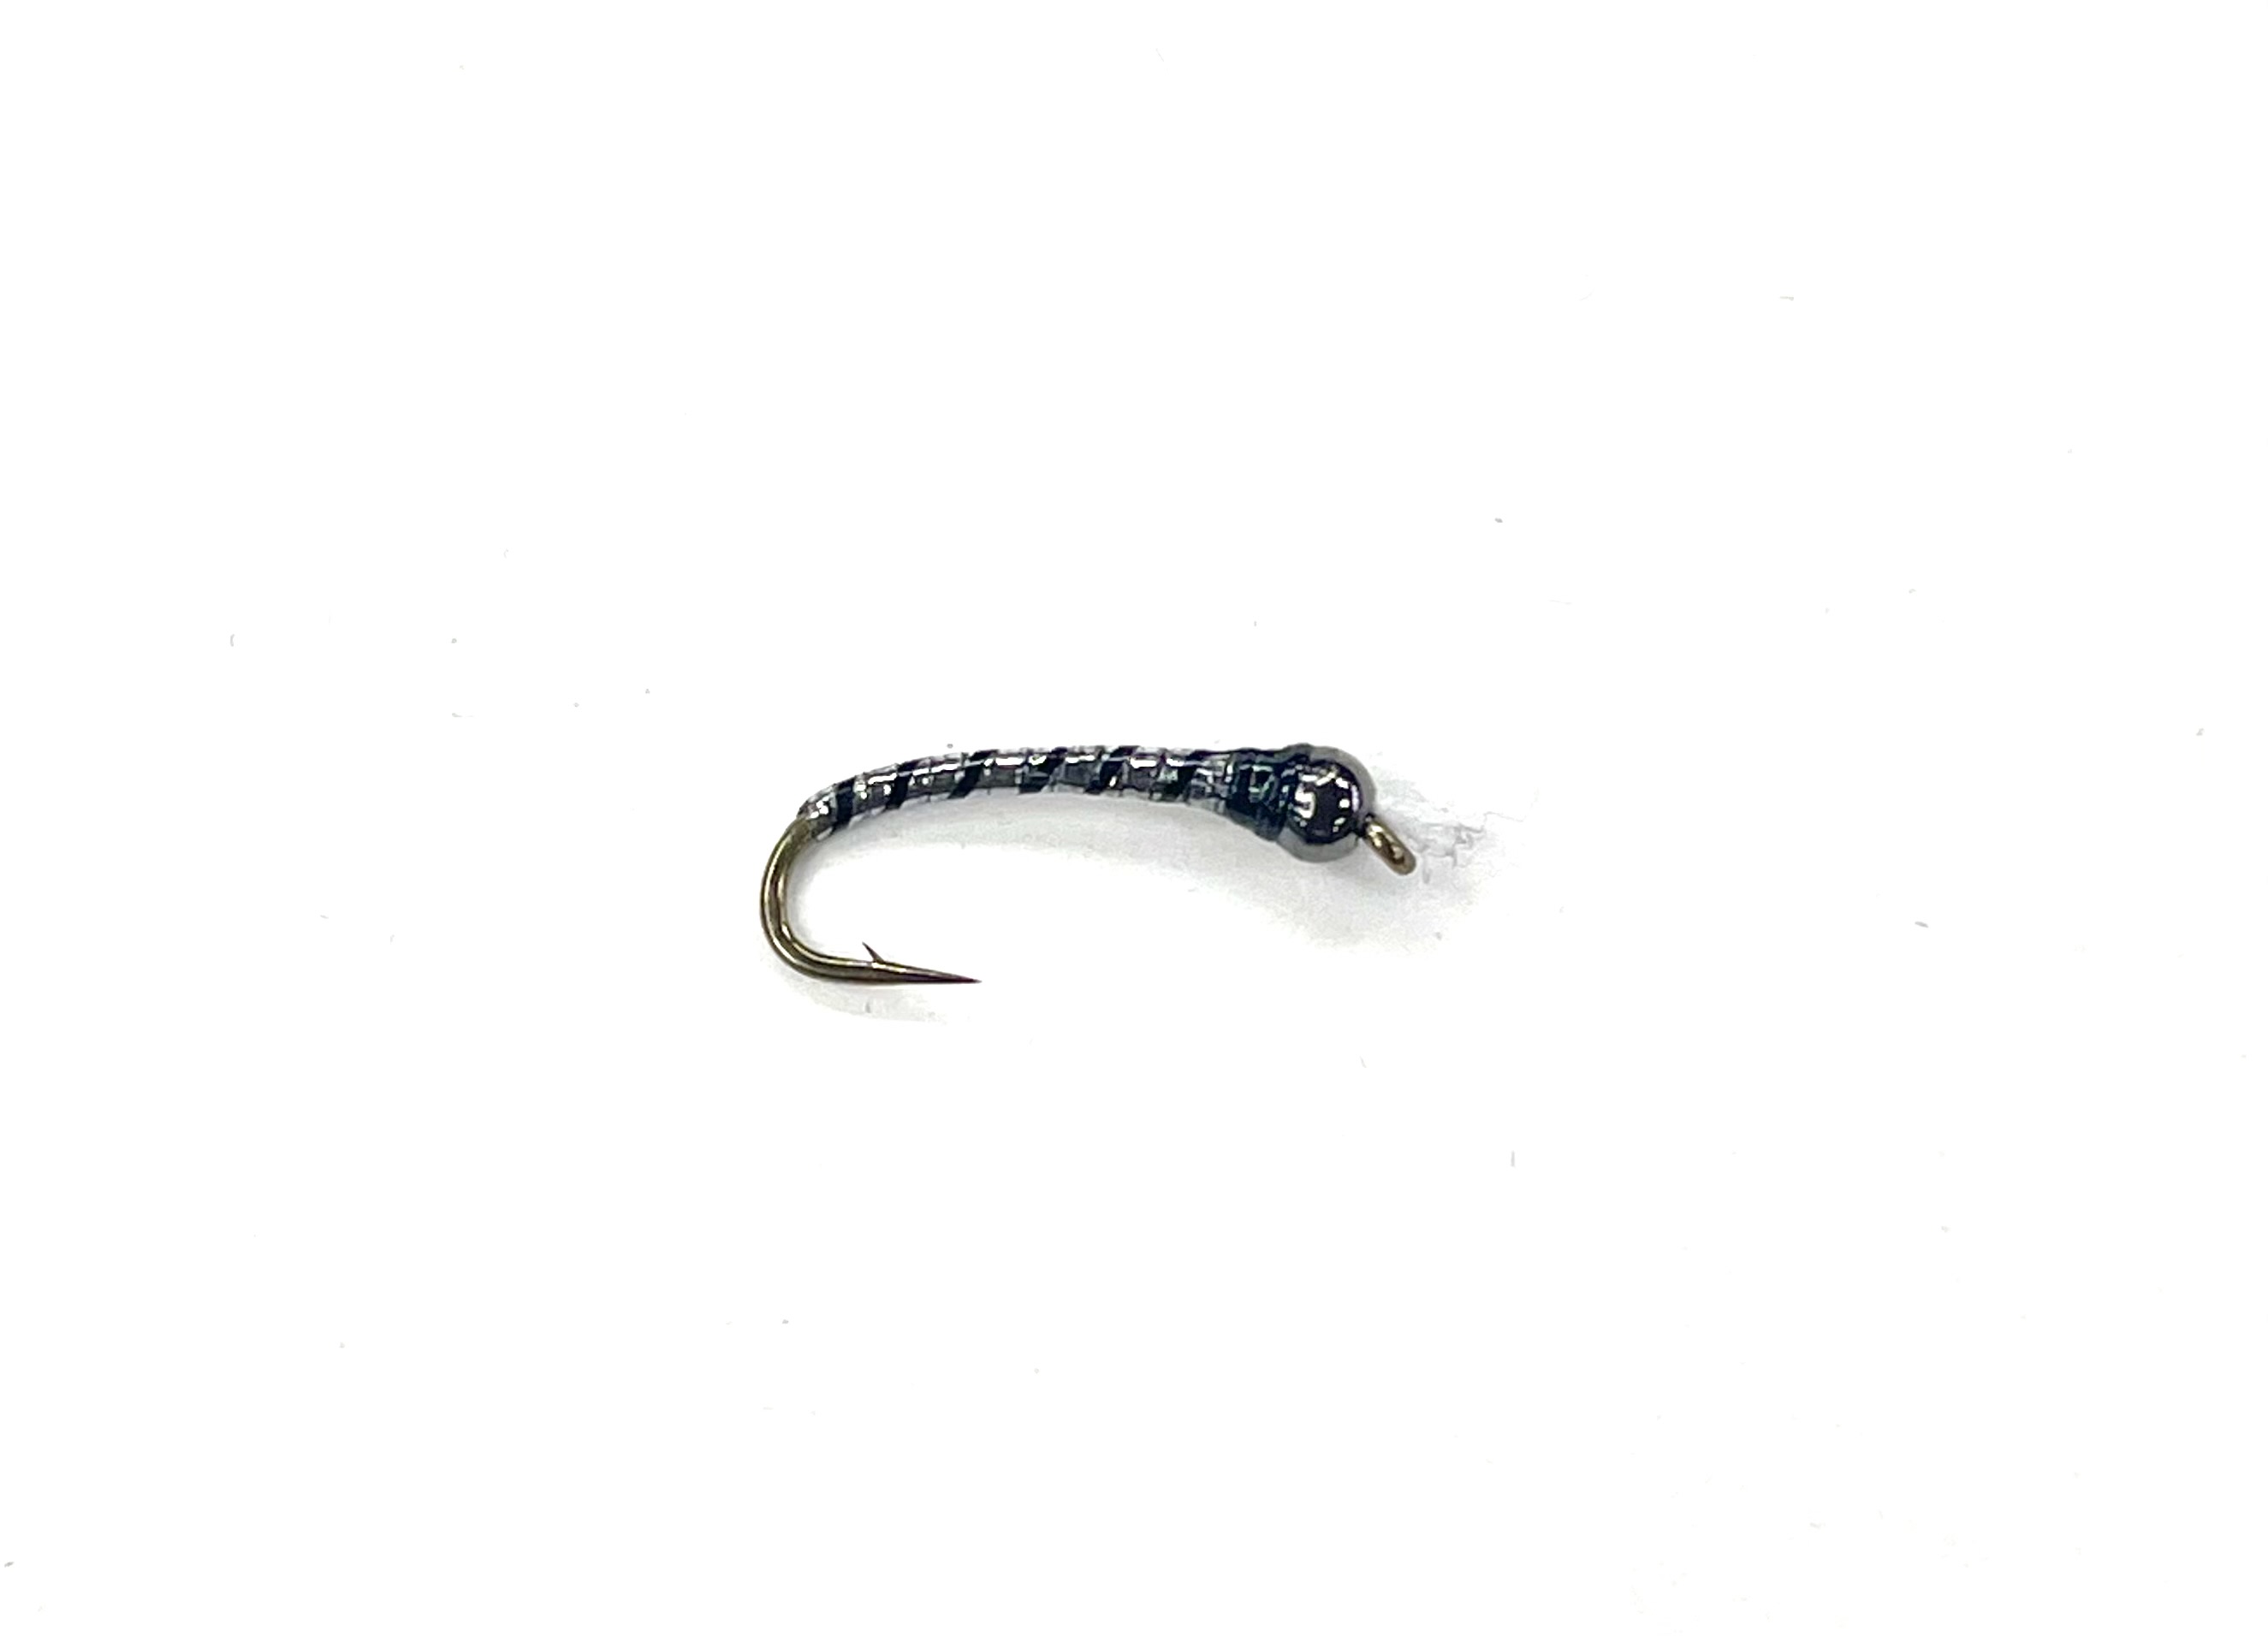 M&Y Static Bag Chironomid - Size 18